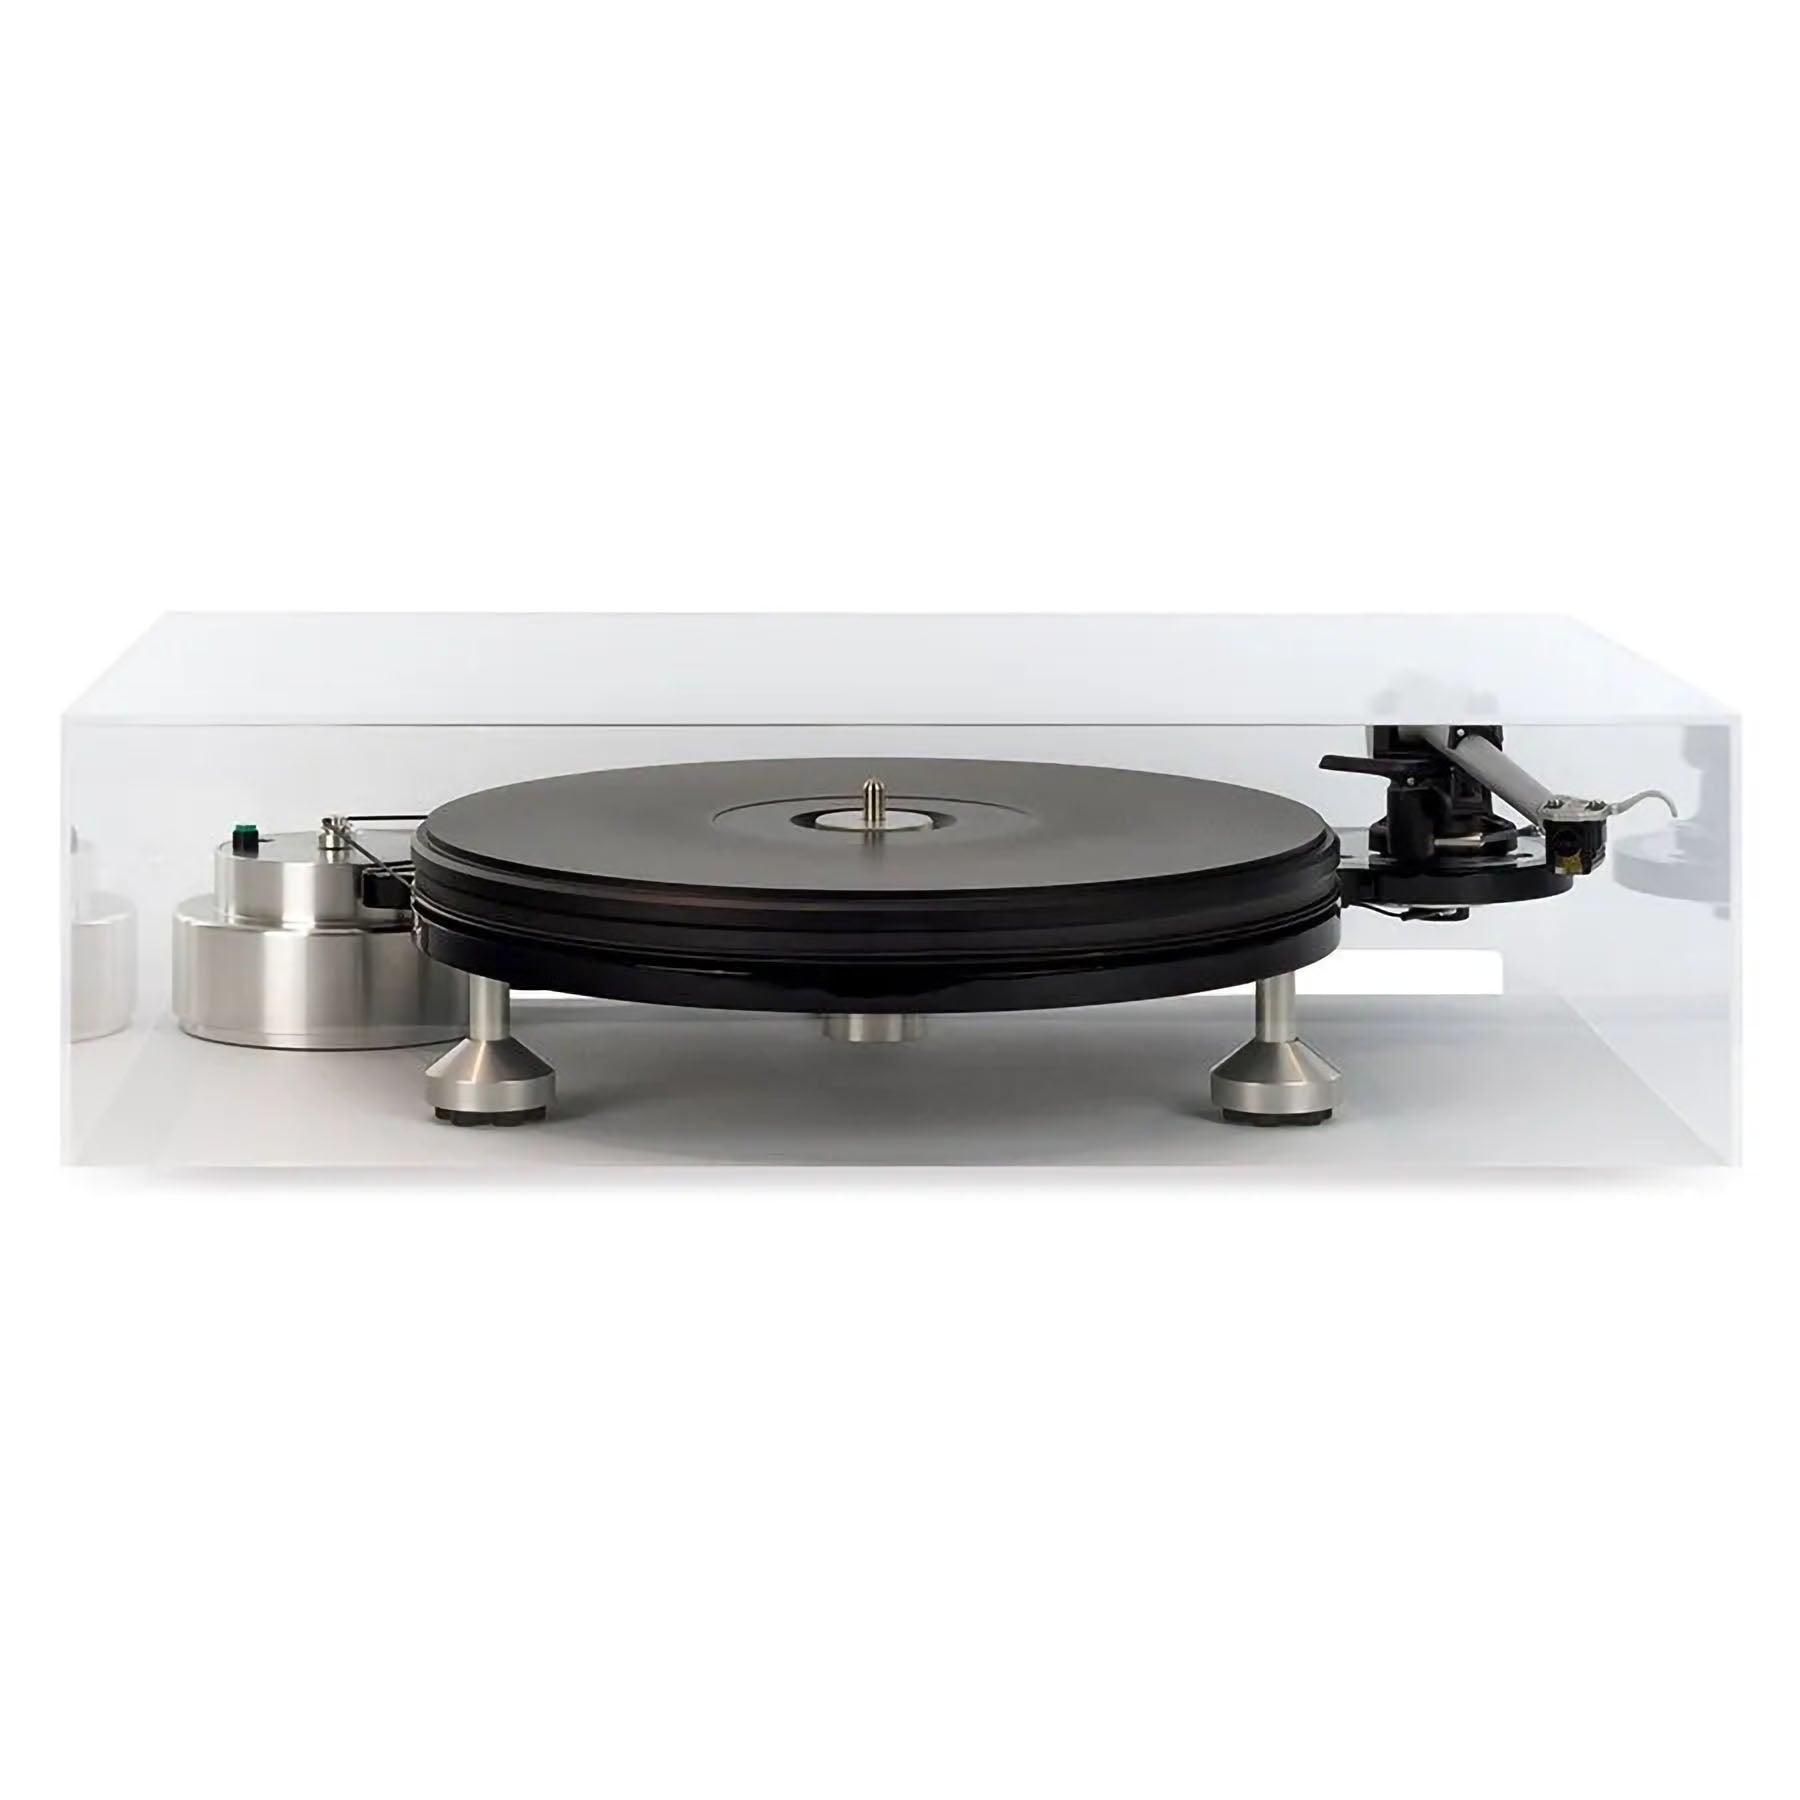 Michell TecnoDec Entry Level Reference Turntable